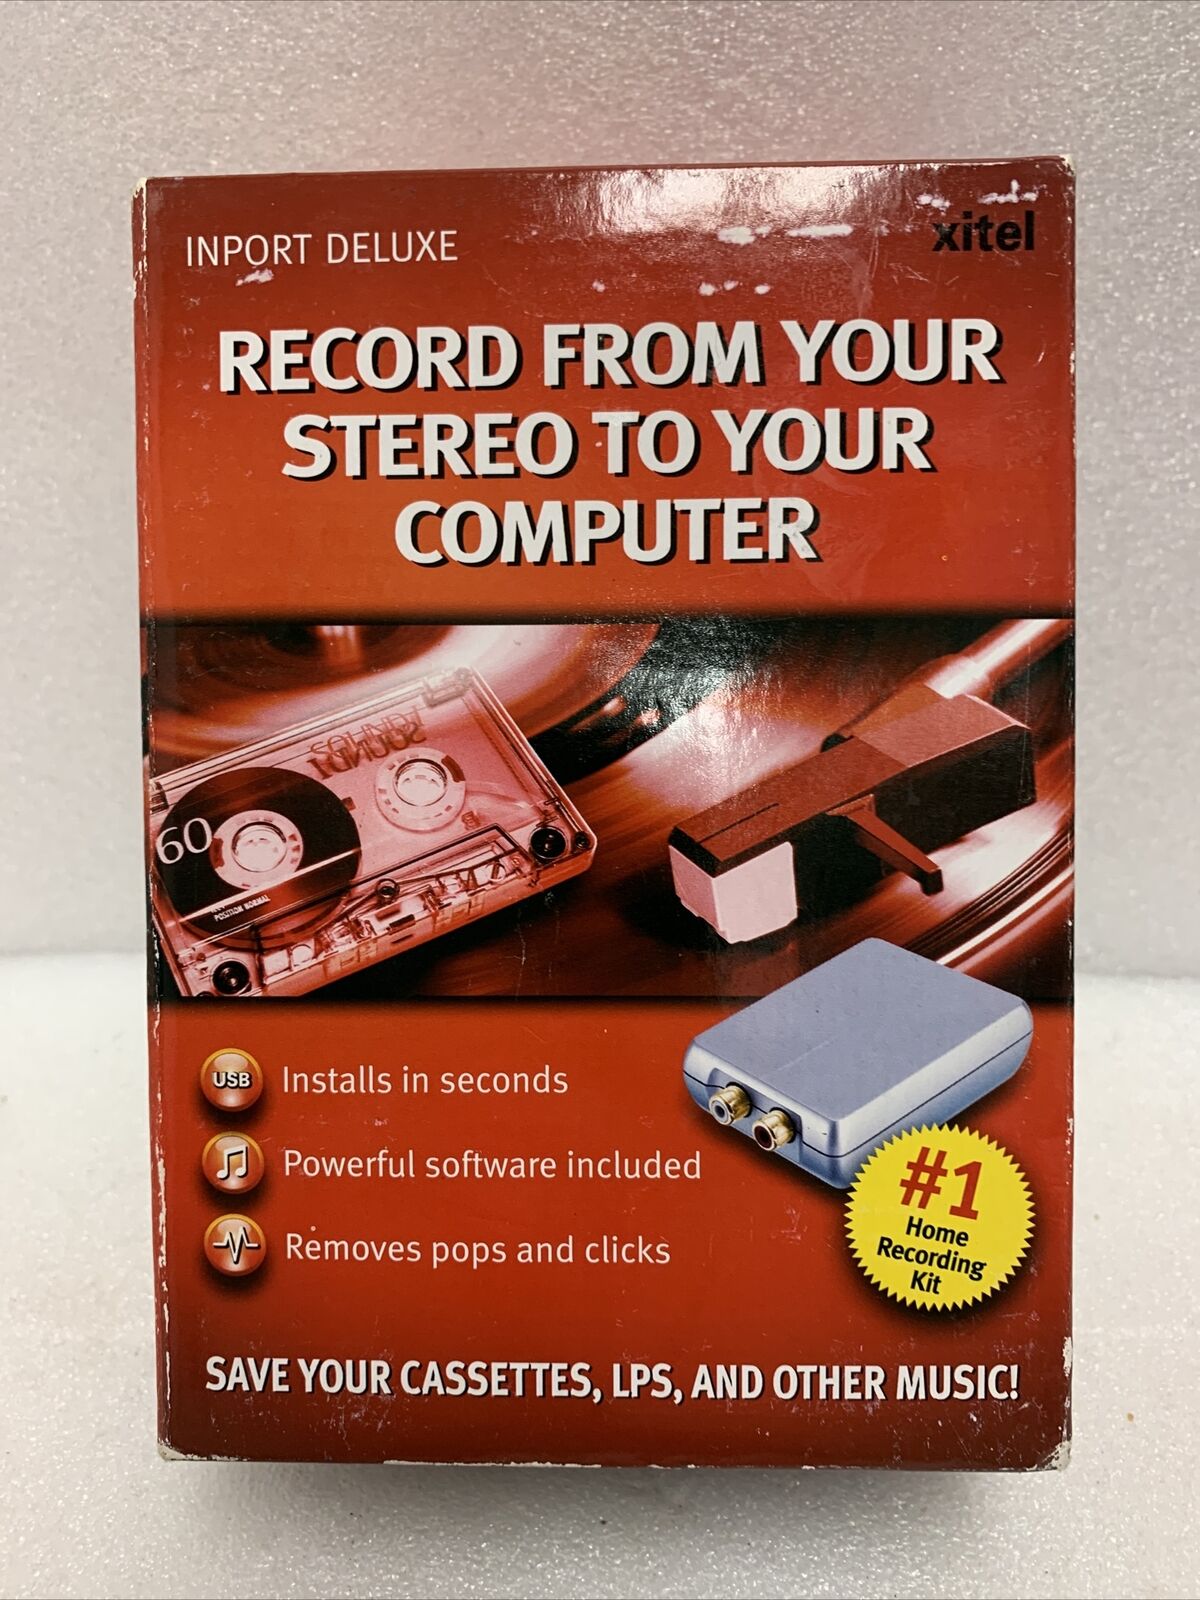 XITEL Import Deluxe Audio Recording Kit Save Cassettes LPs & Other Music USB NEW